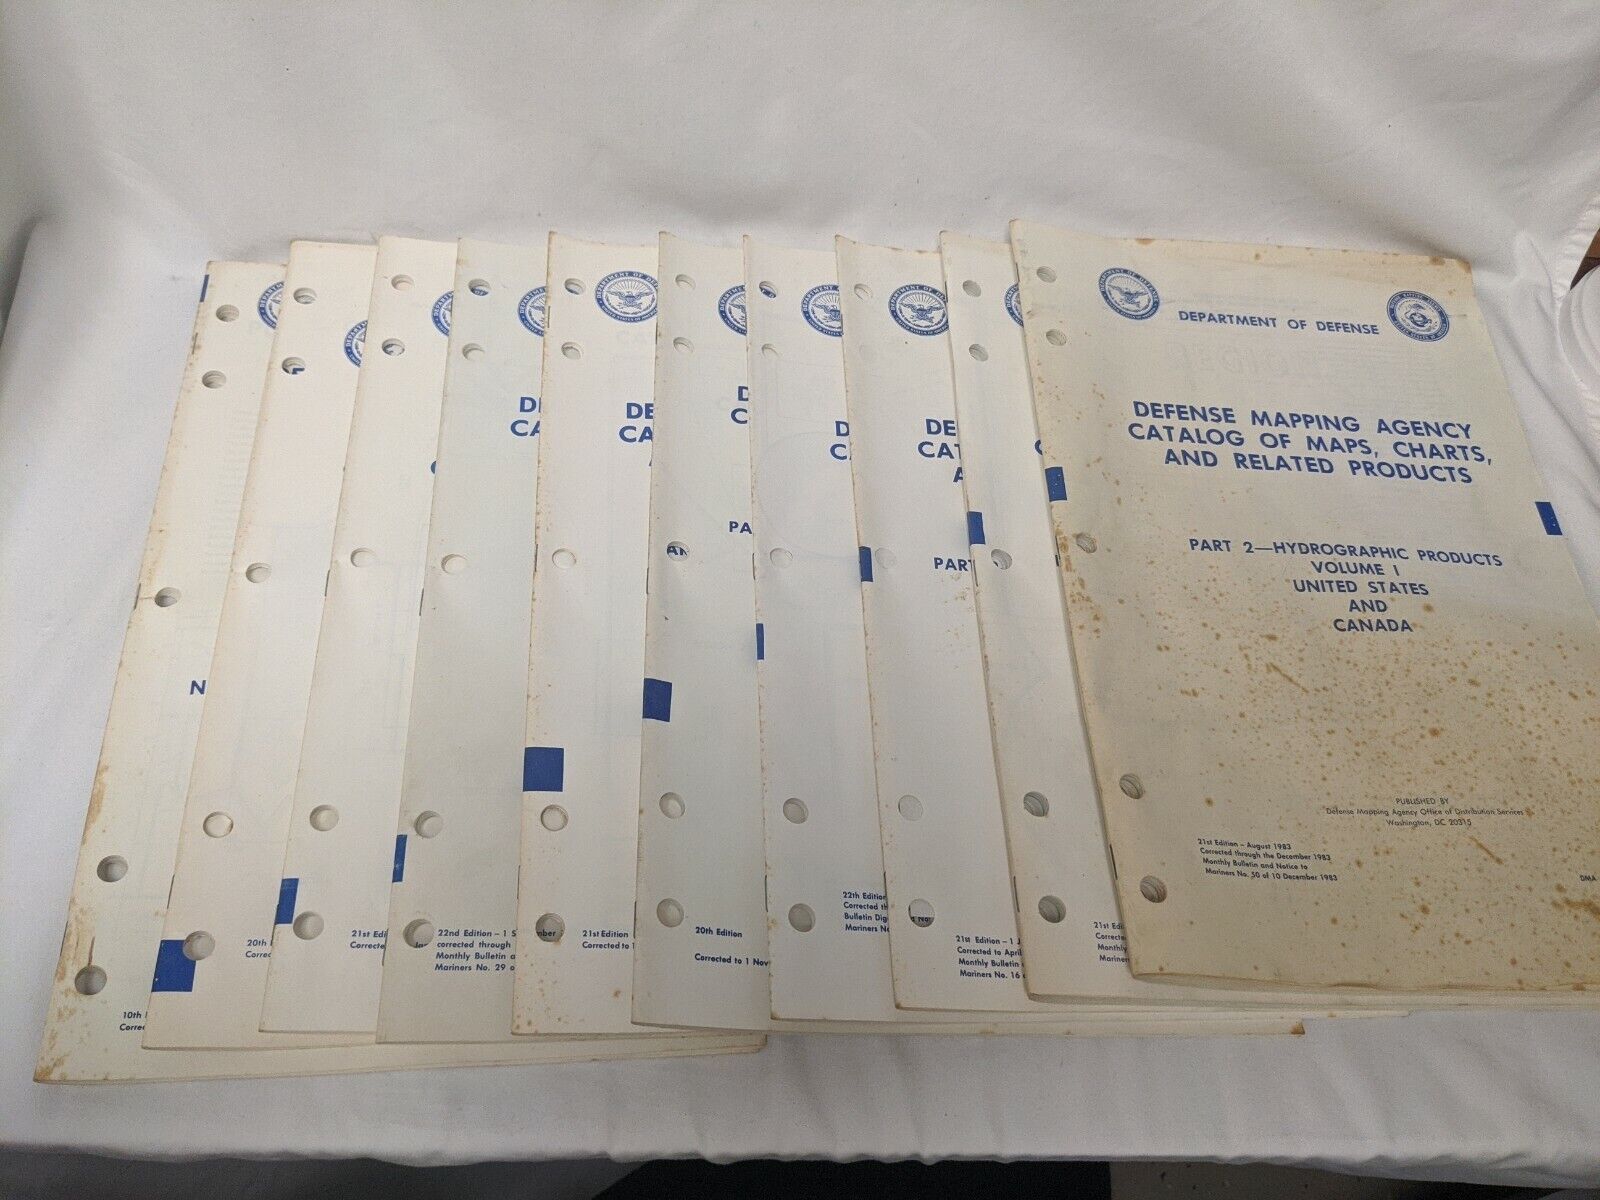 Department Defense Mapping Agency Catalog Maps Charts 10 Volumes 1982-1983 I X 